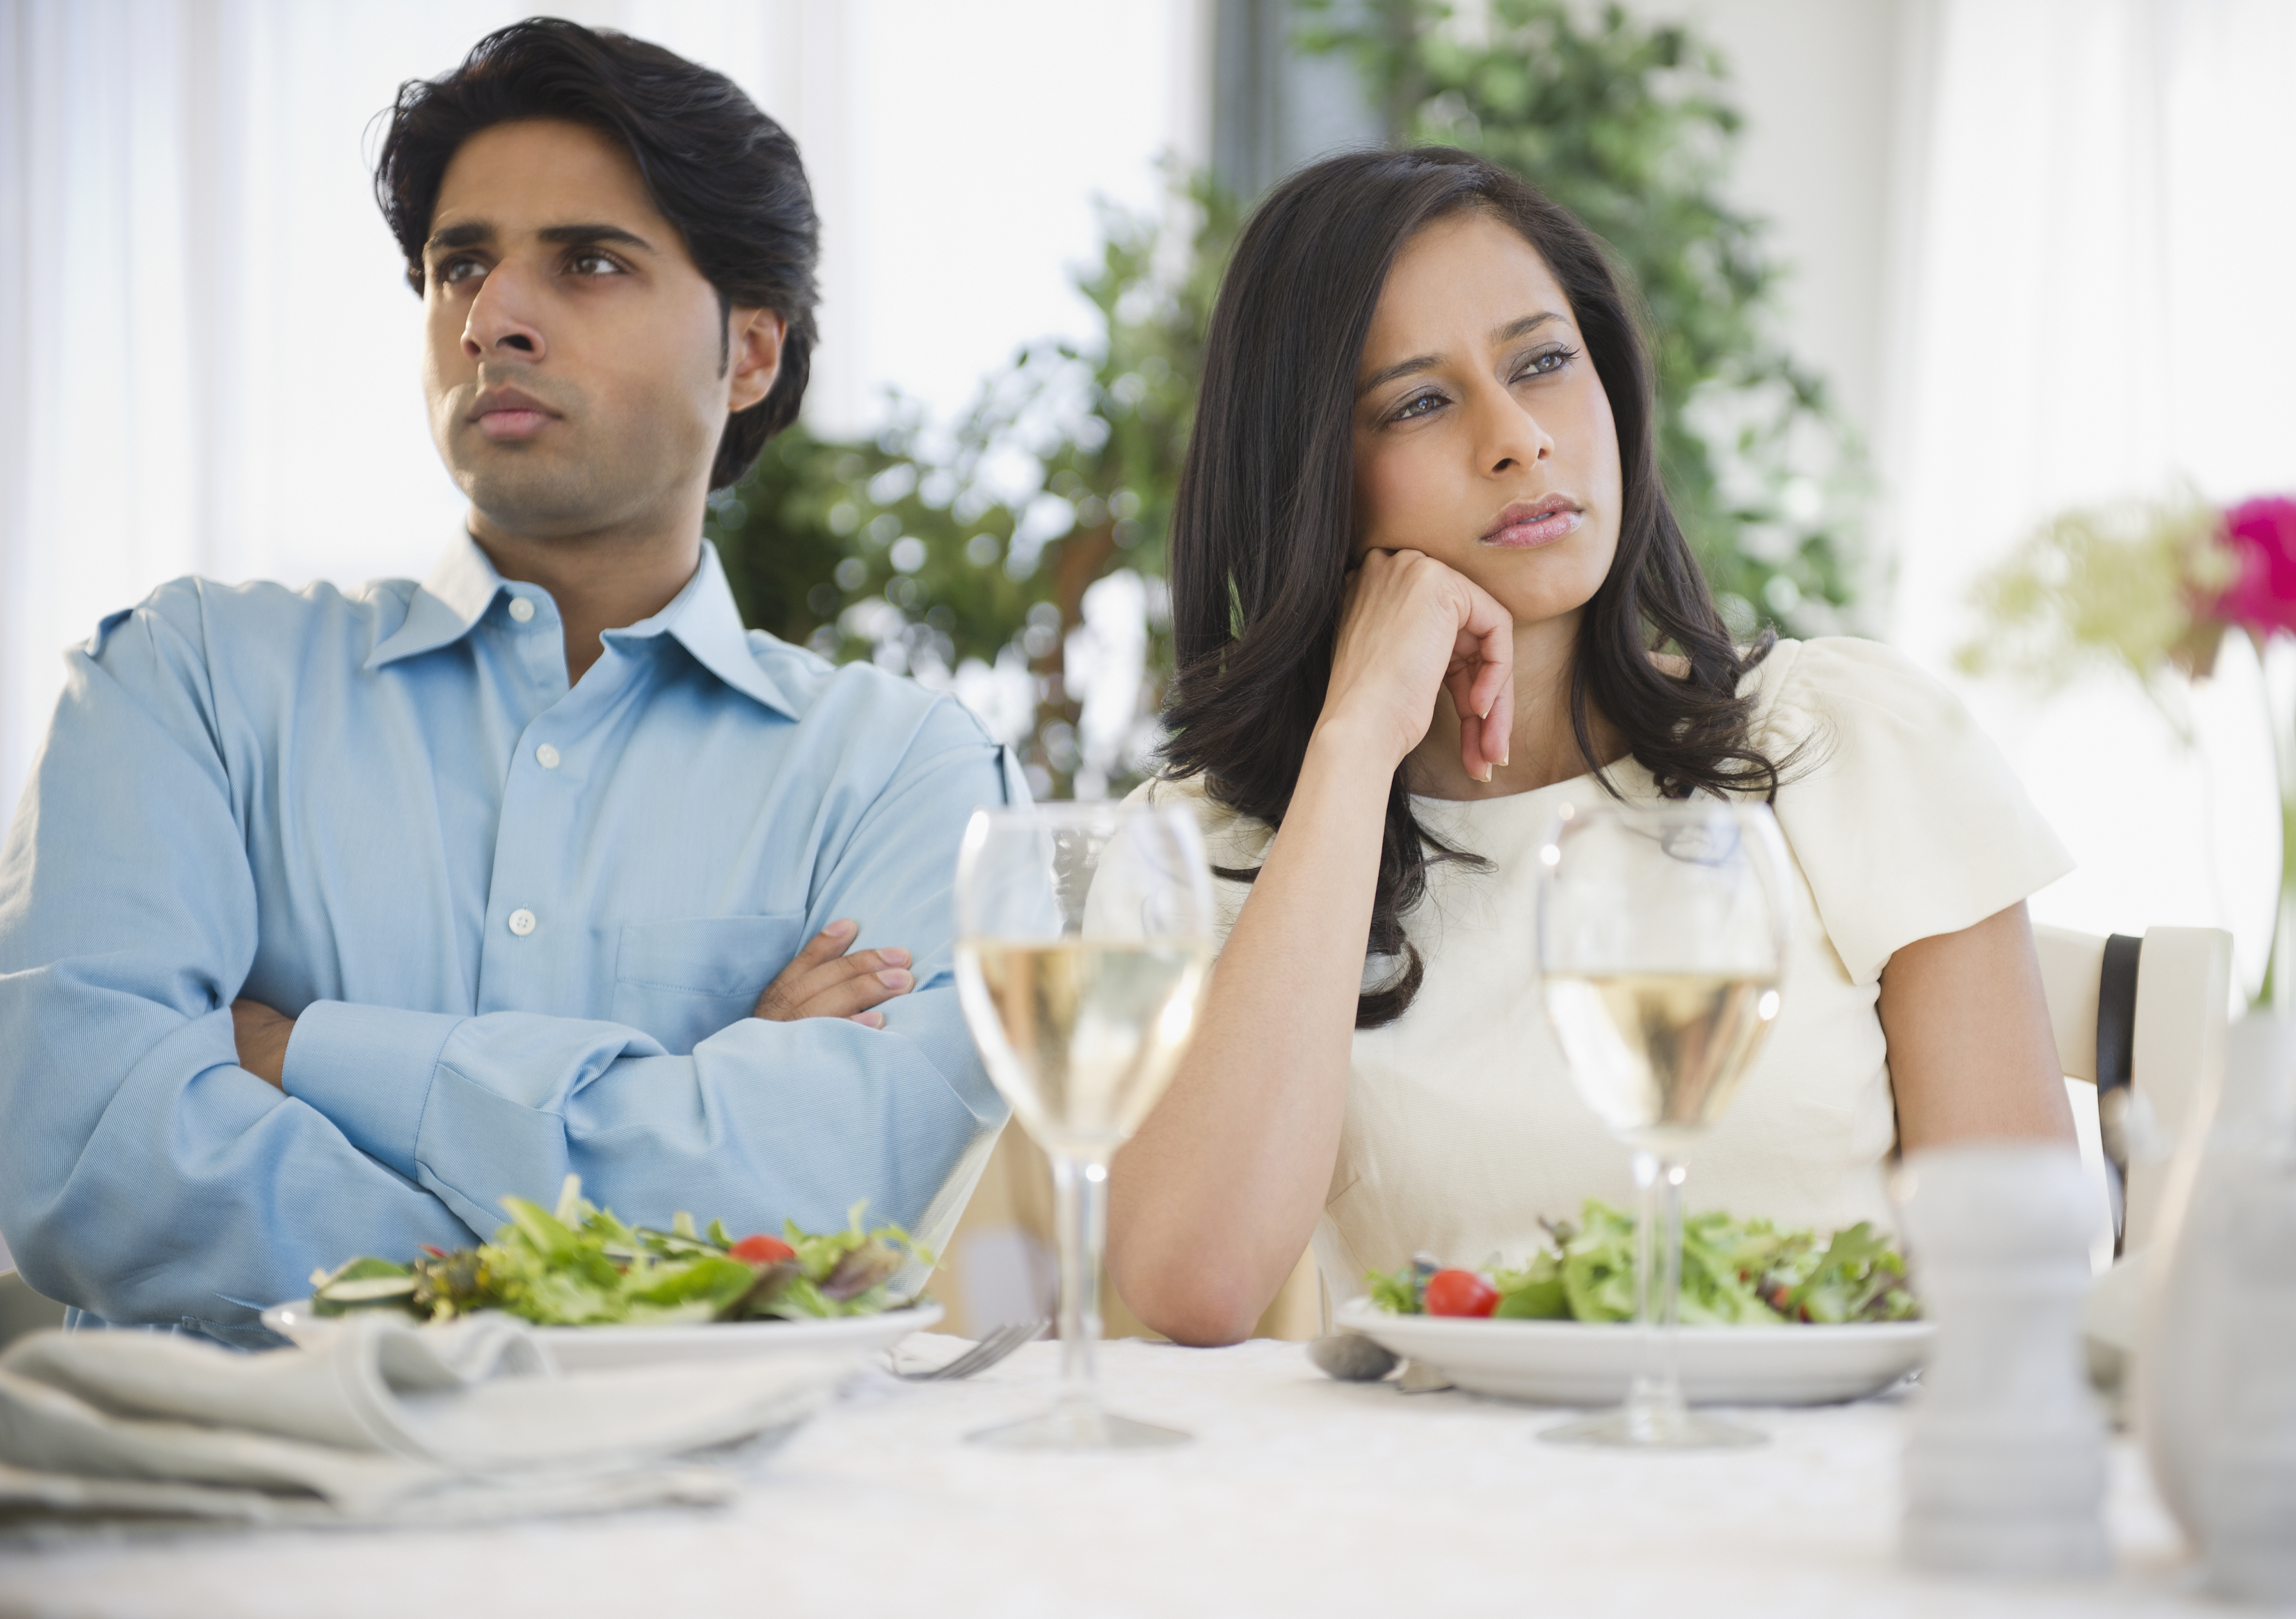 Man and woman not talking | Source: Getty Images